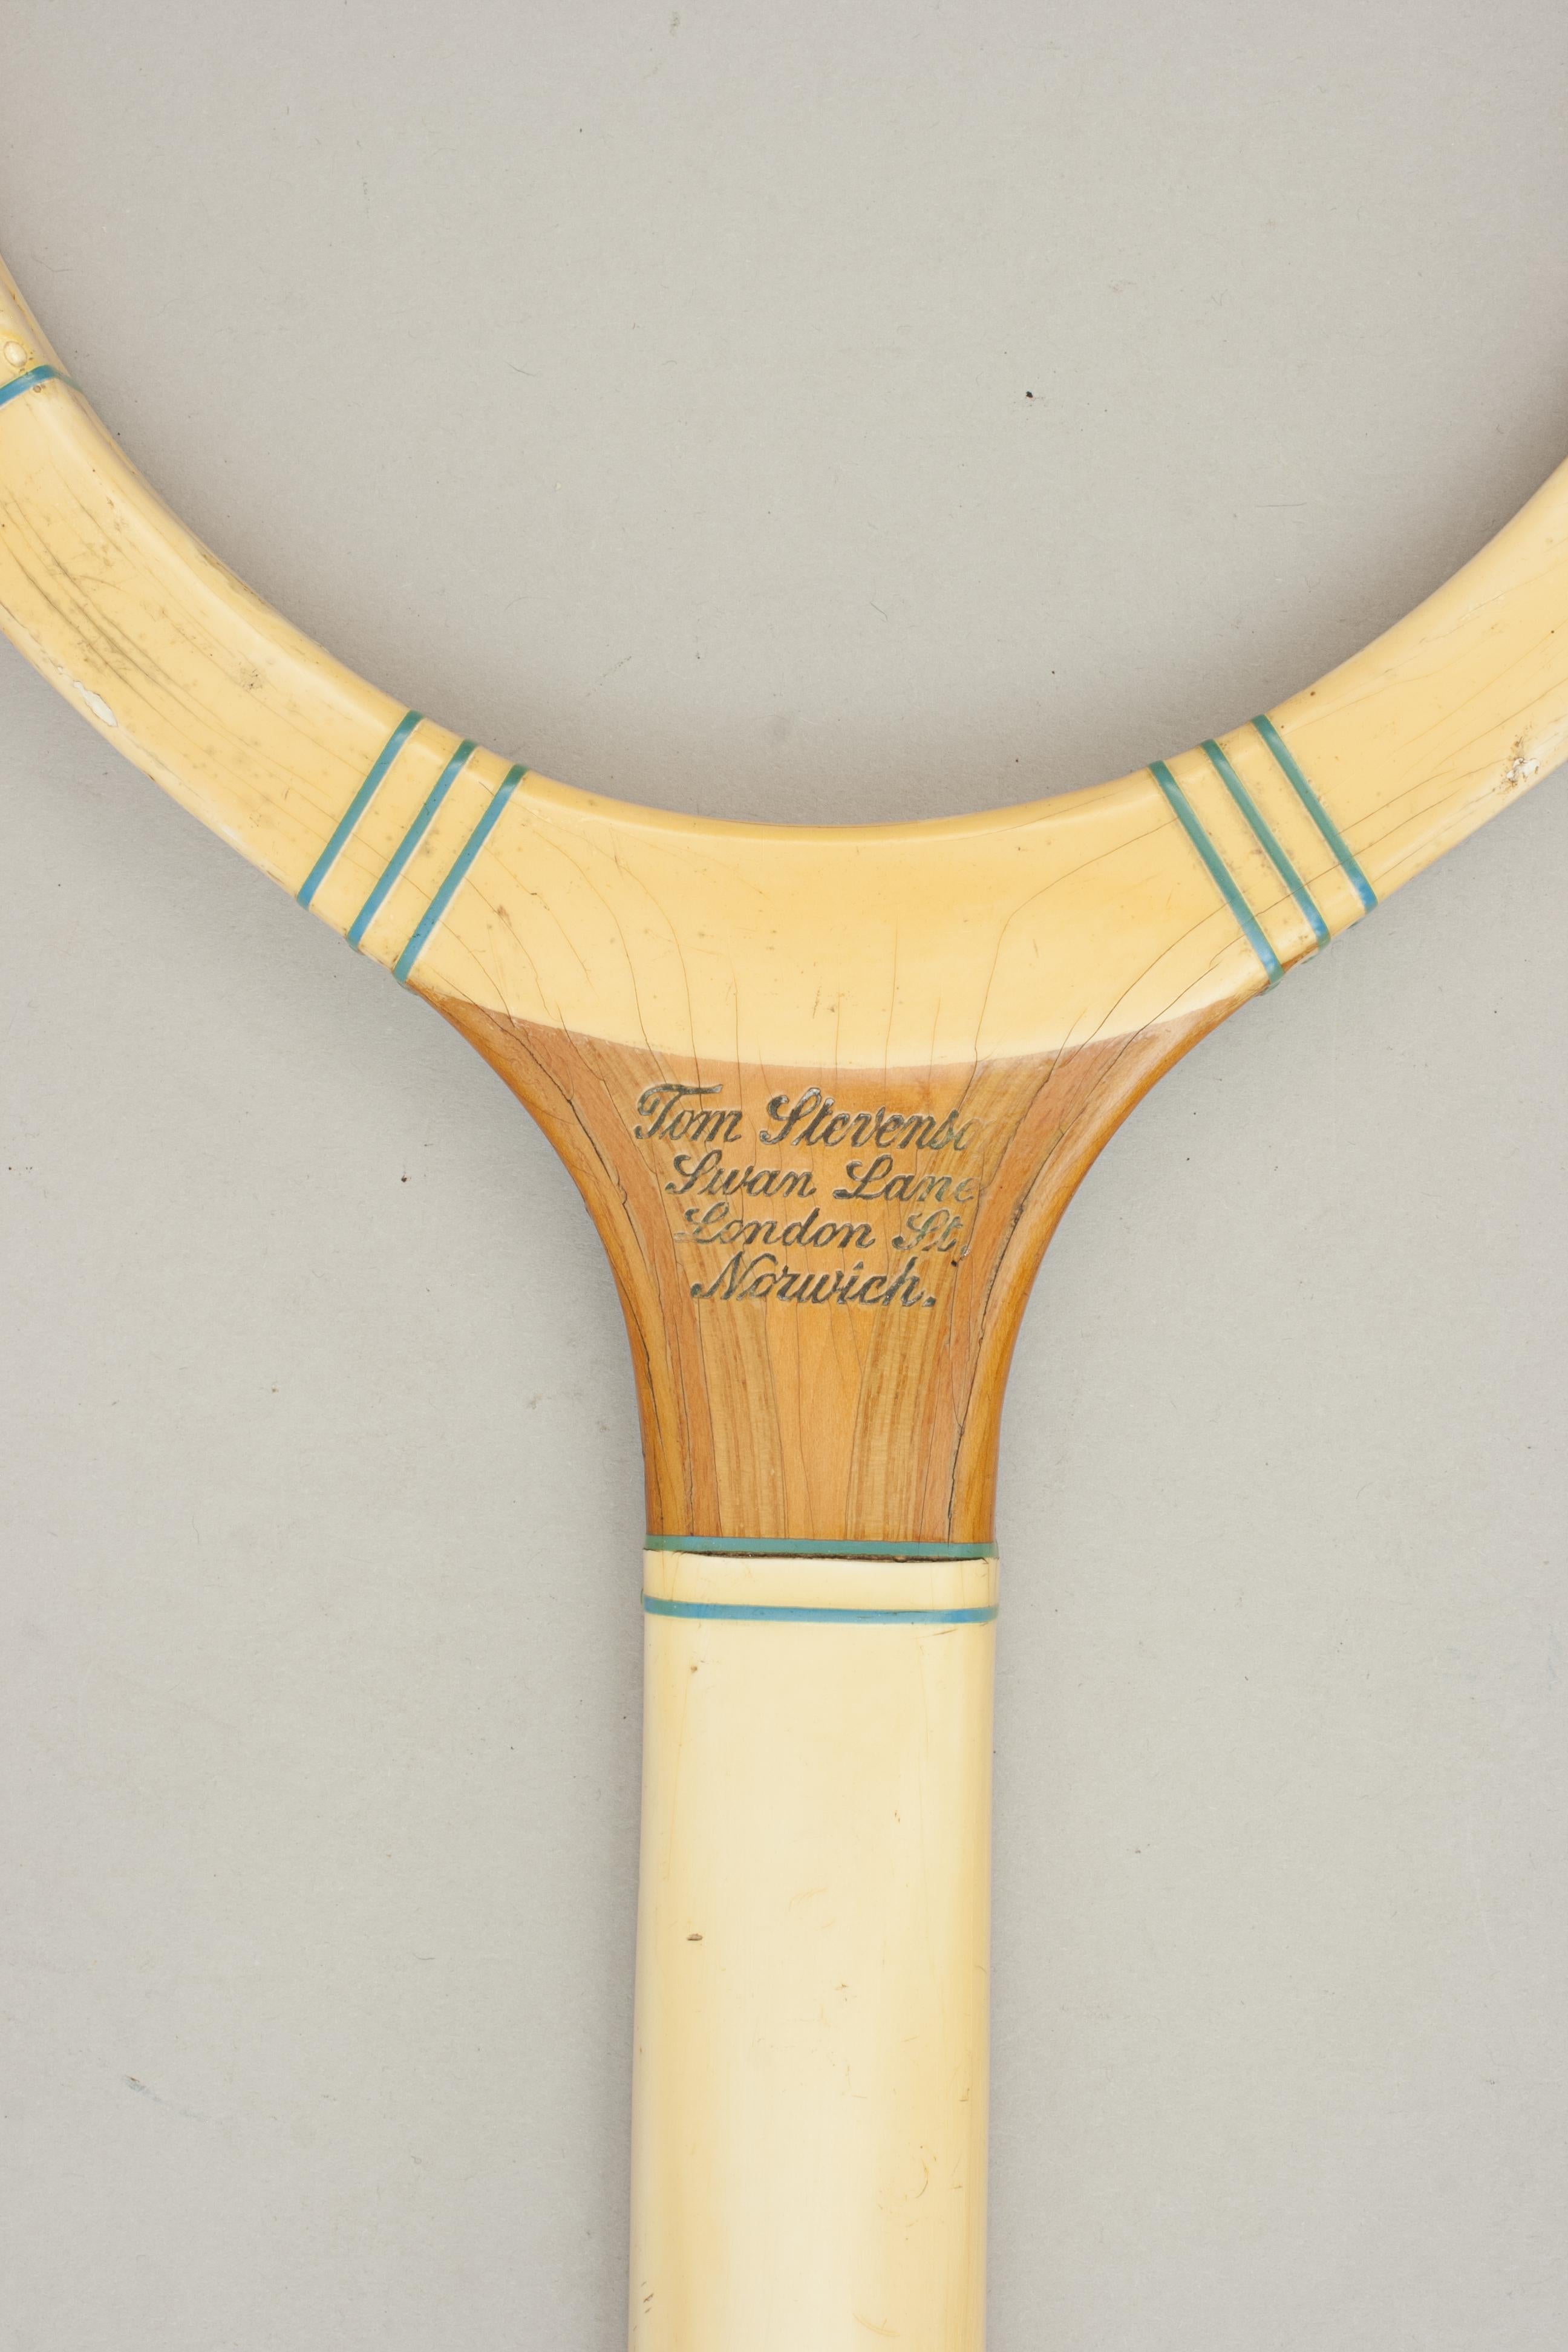 Mid-20th Century Vintage Lawn Tennis Racket, the Test by Stevenson For Sale